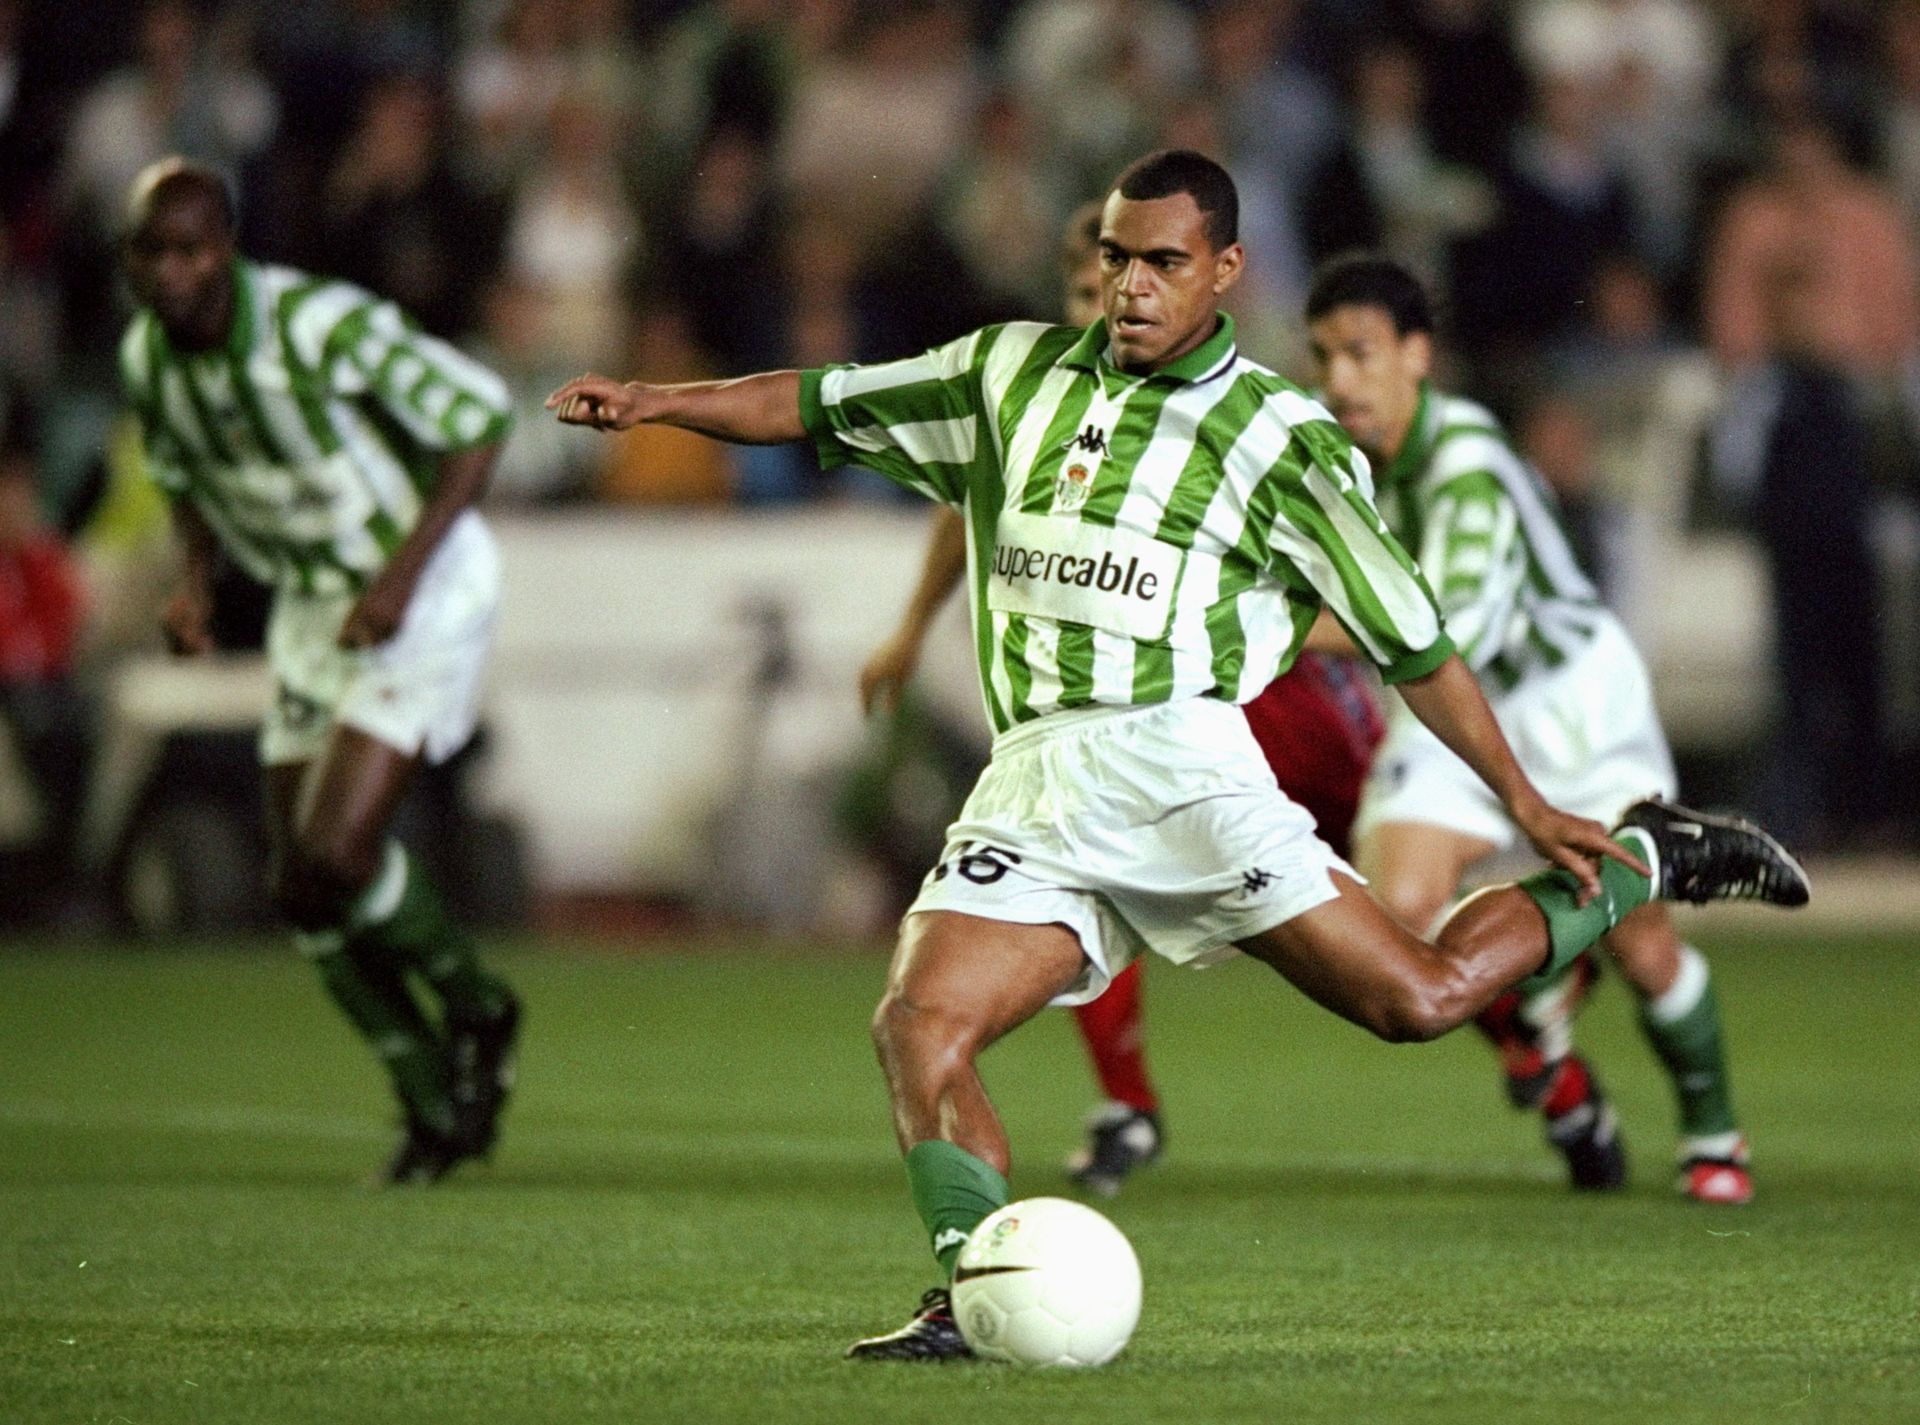 <p>                     Denilson became the most expensive footballer in the world in 1998 after moving from Sao Paulo to Real Betis for a fee of €31.5 million.                   </p>                                      <p>                     The winger spent seven years at Betis in total, making over 200 appearances either side of a brief spell on loan back in Brazil with Flamengo, but he largely failed to live up to the hype and was a fringe player in the club's Copa del Rey win in 2005.                   </p>